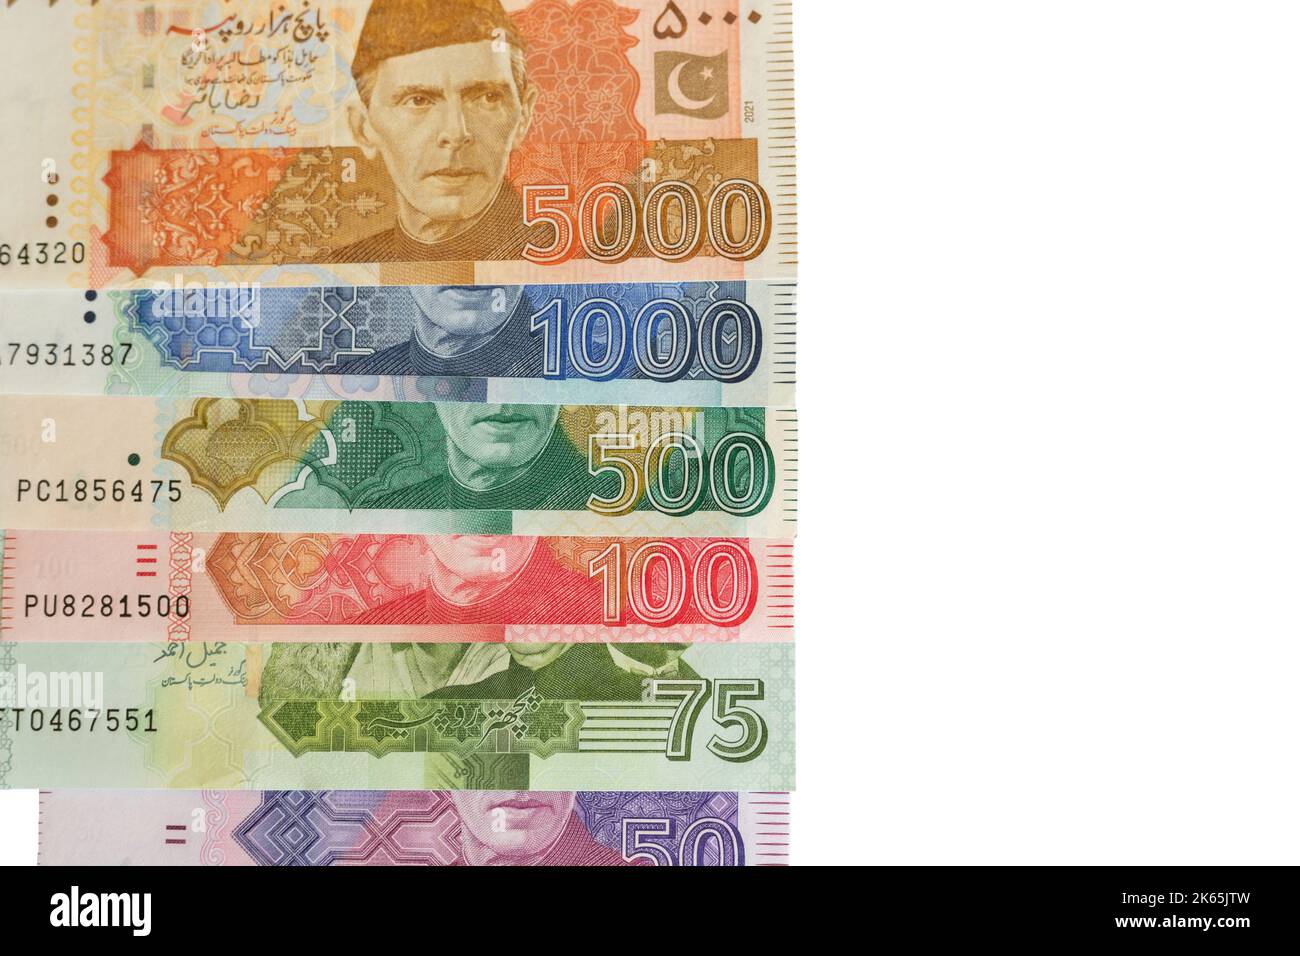 Pakistani currency banknotes from high to lower denomination set in order with copy space Stock Photo